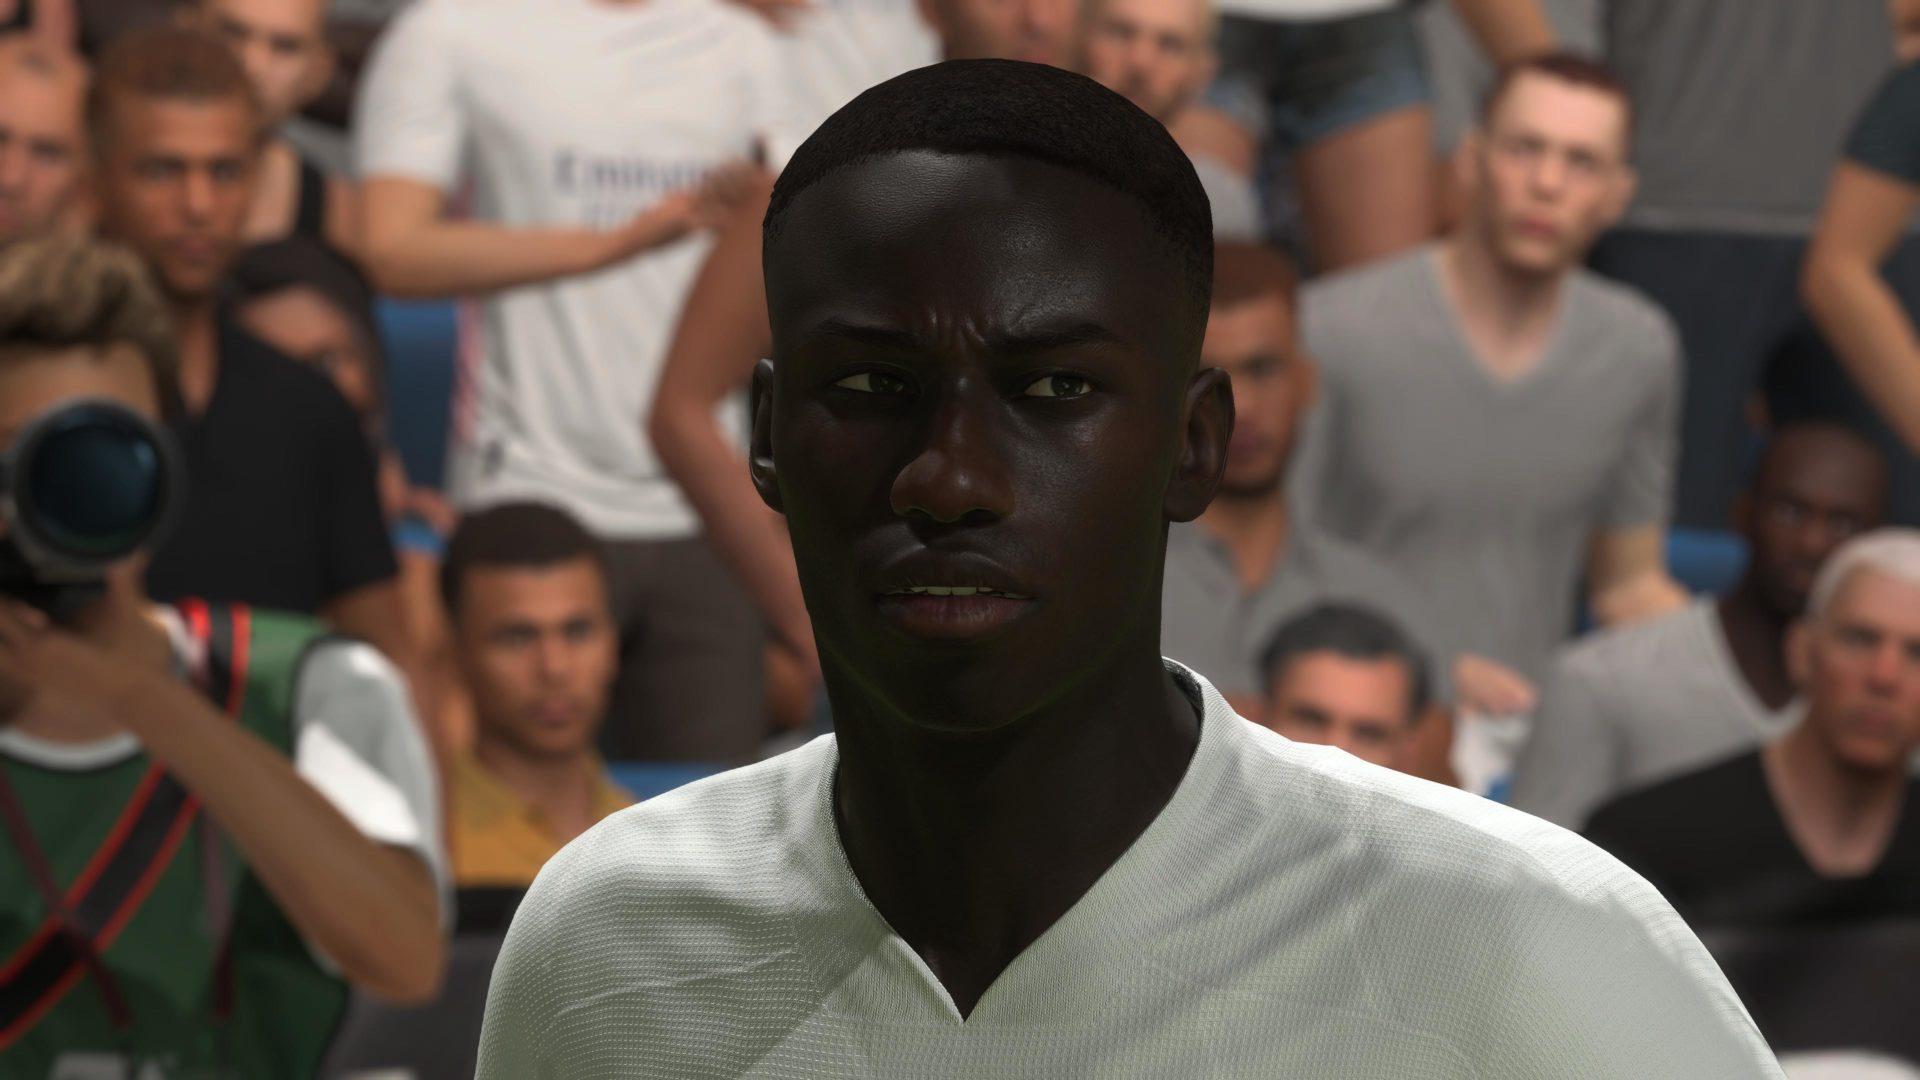 FIFA 21's meta French leftback Ferland Mendy may get an upgrade this week.